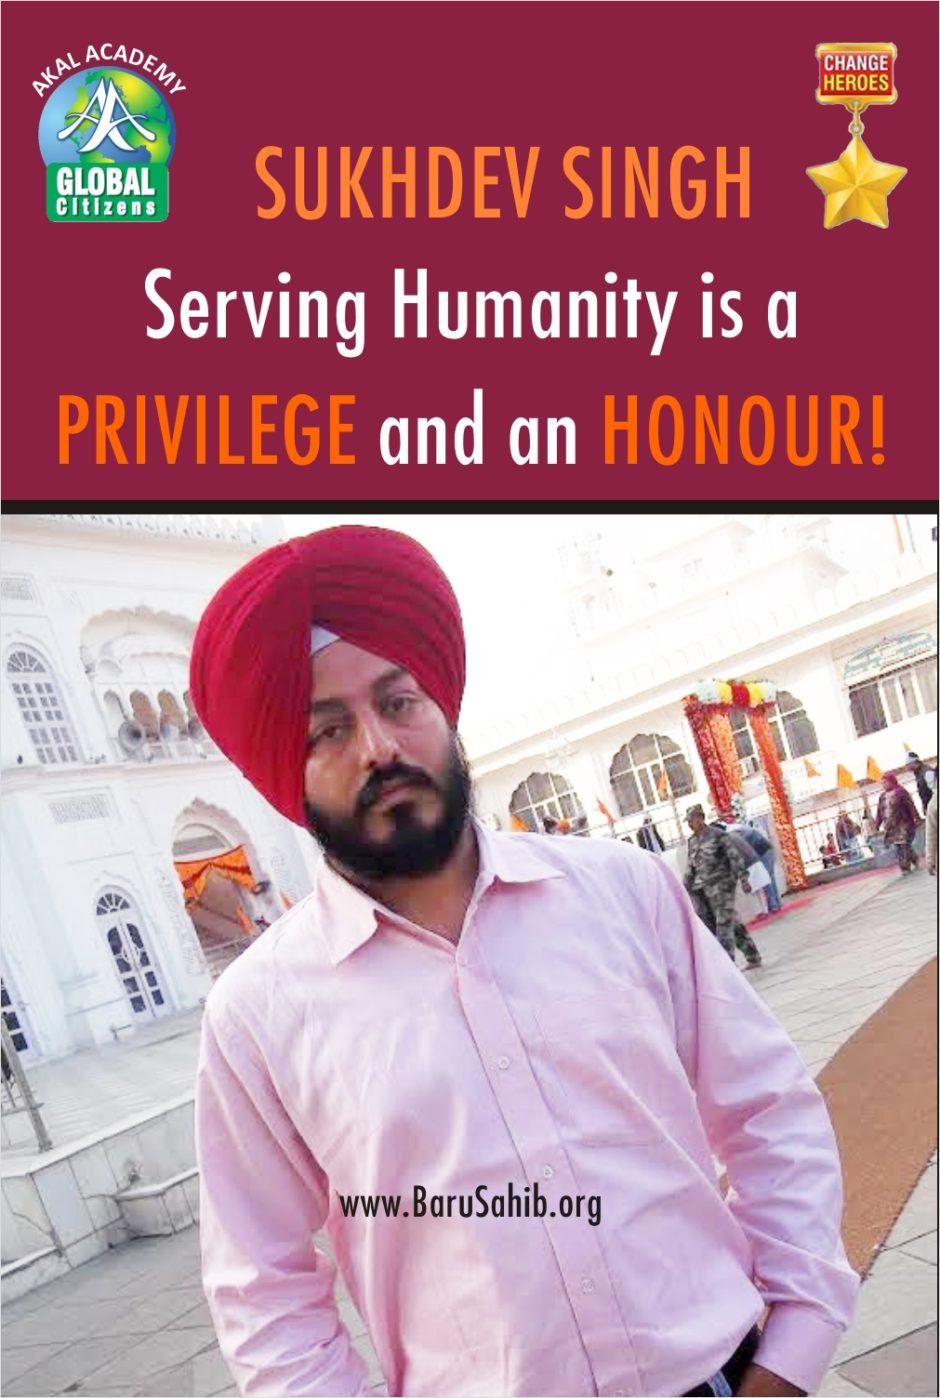 SUKHDEV SINGH – Serving Humanity is a PRIVILEGE and an HONOUR!